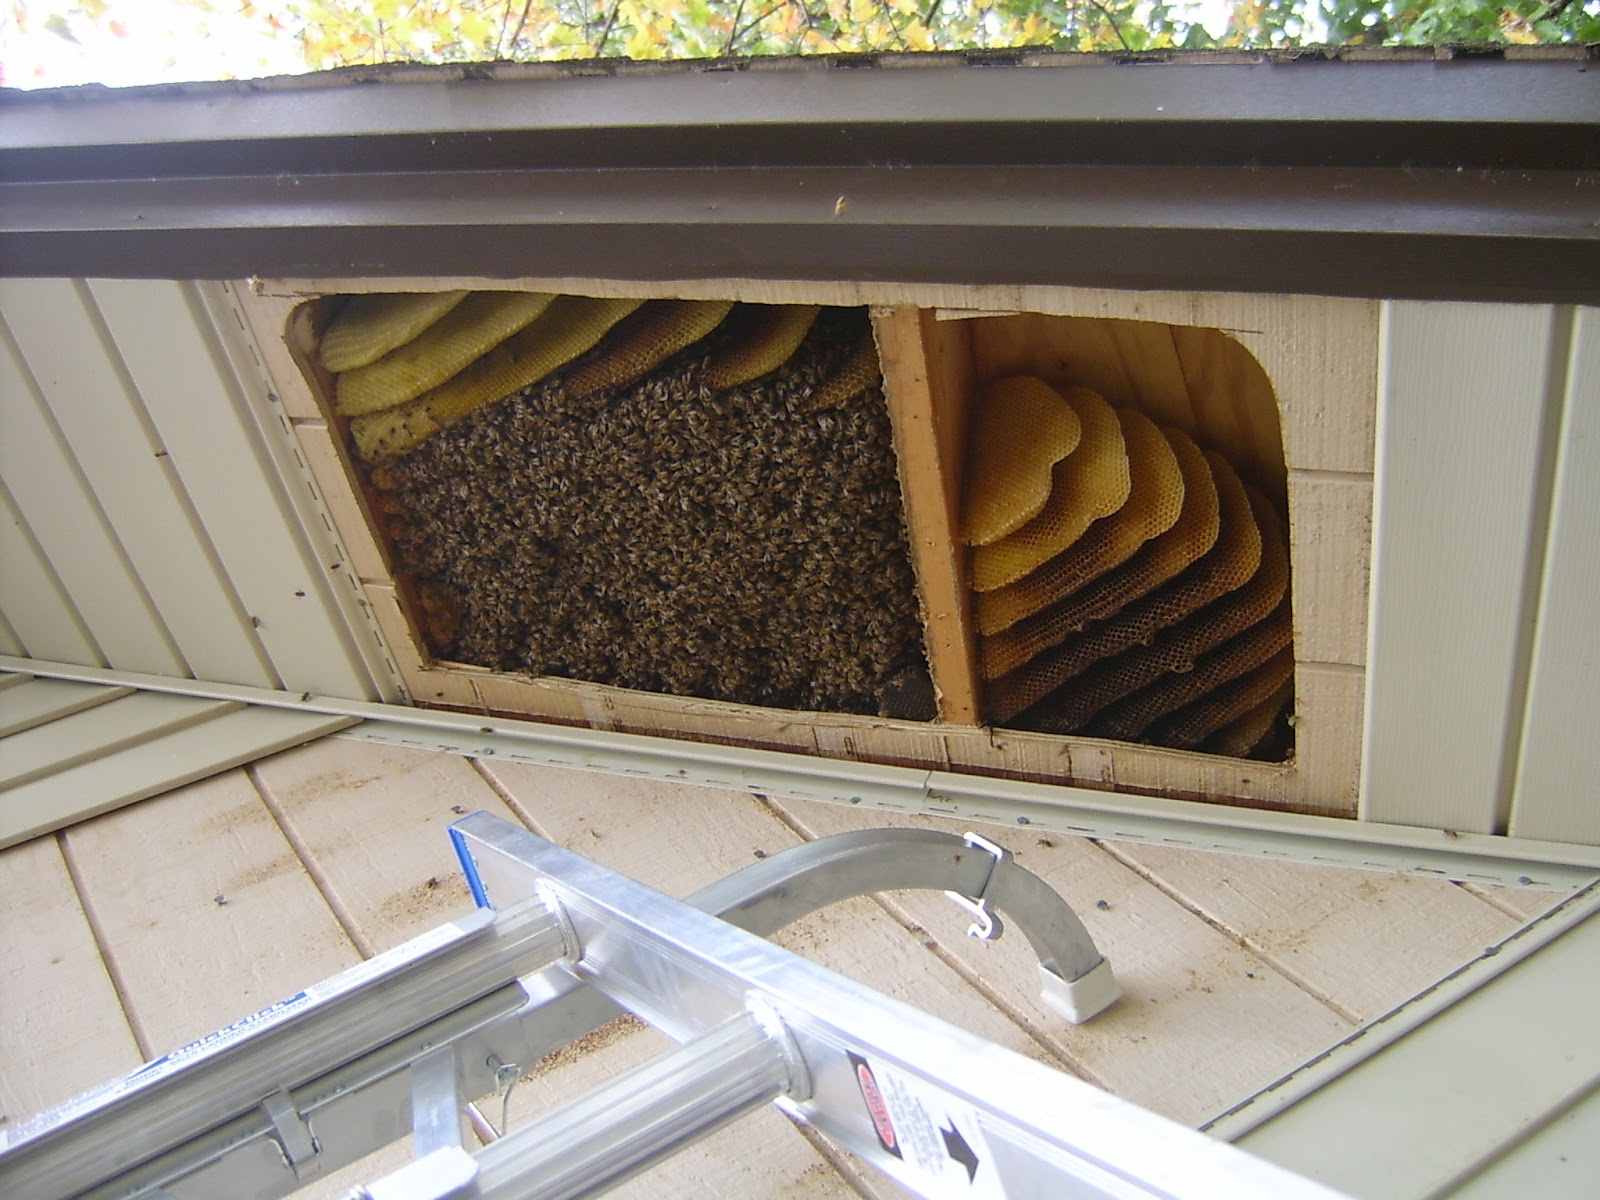 a cut-out section of eaves showing many combs and bees